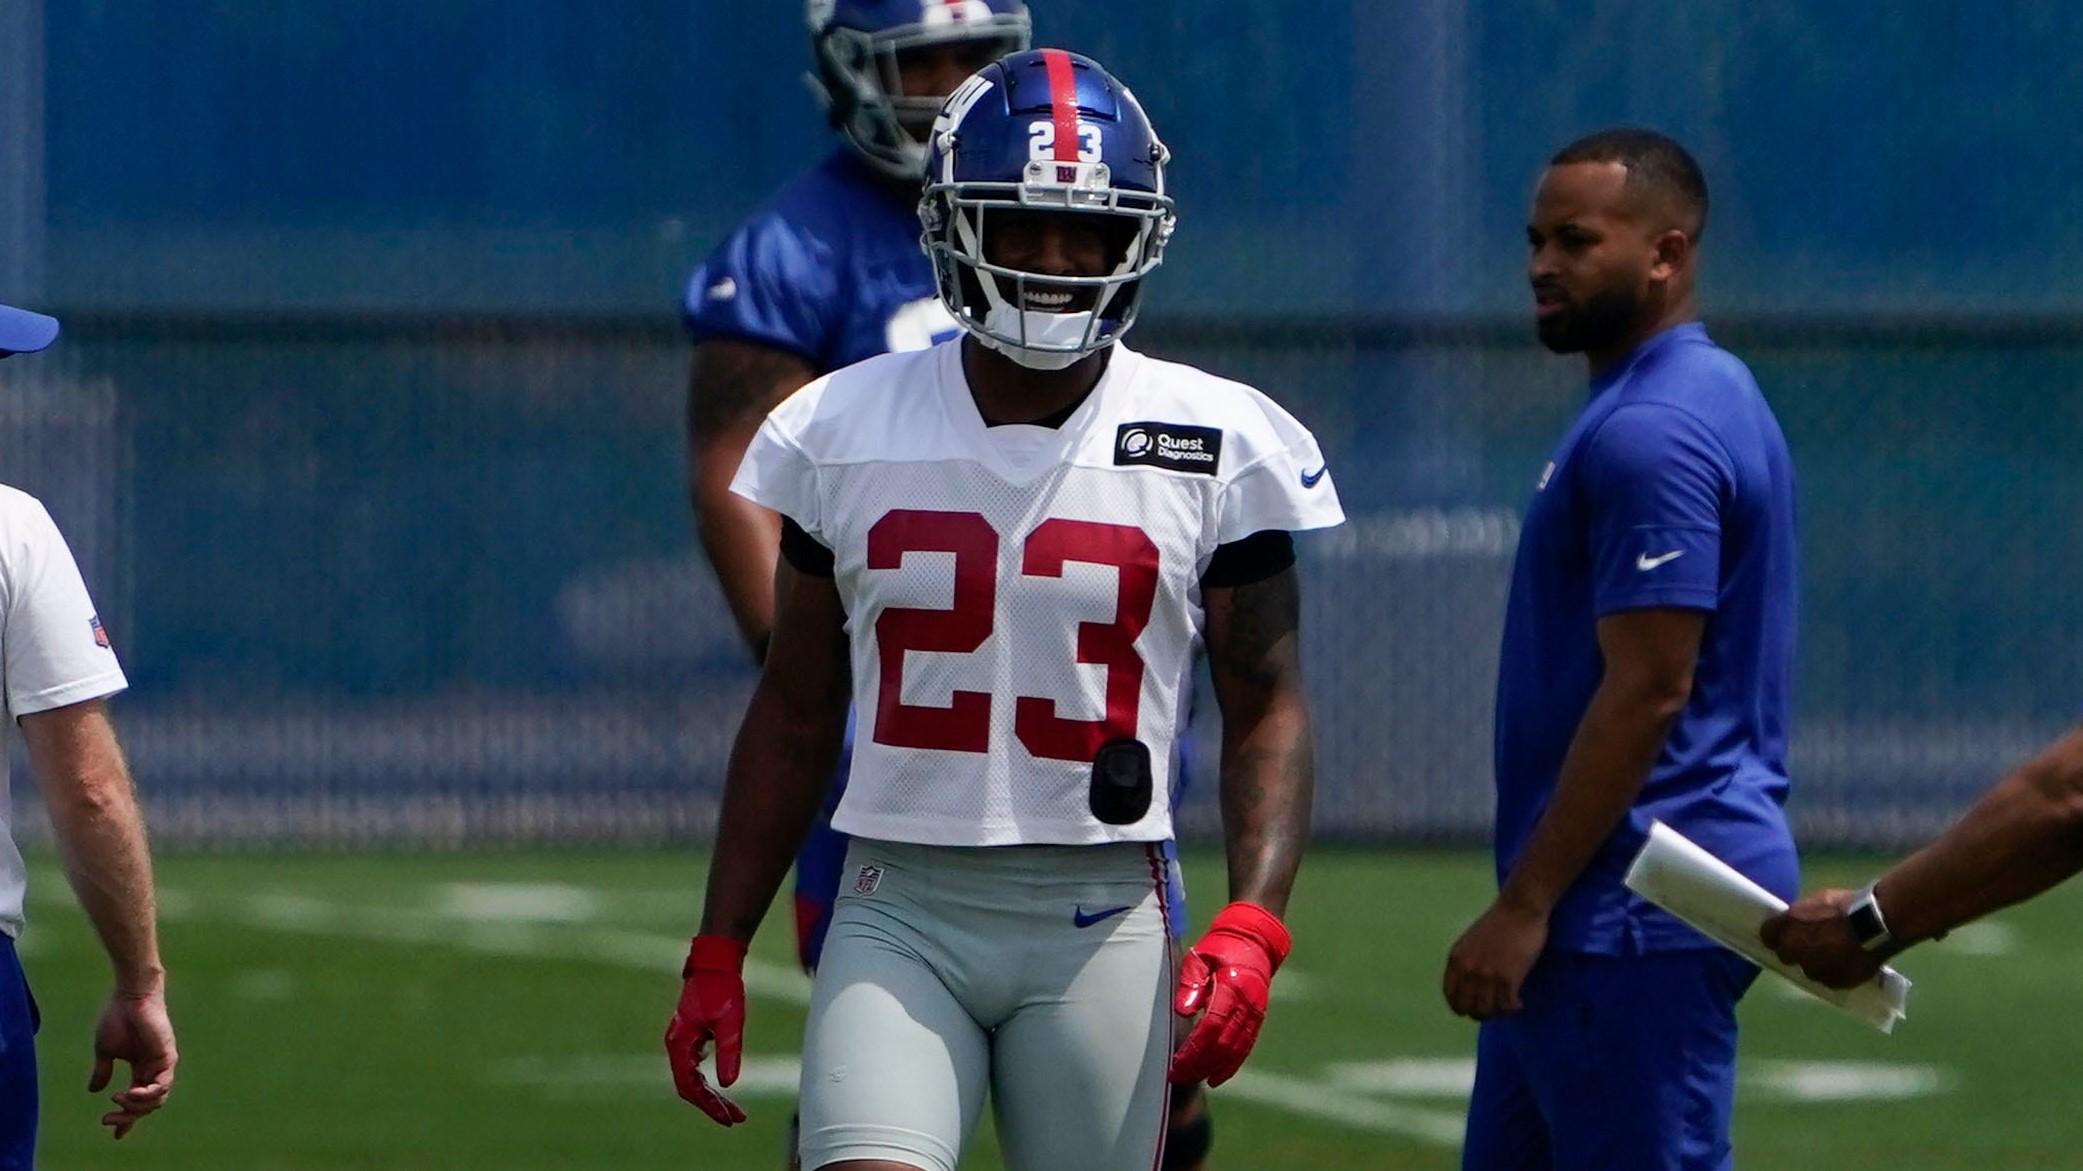 New York Giants defensive back Logan Ryan (23) warms up on the first day of Giants minicamp at Quest Diagnostics Training Center on Tuesday, June 8, 2021, in East Rutherford. Nyg Minicamp / Danielle Parhizkaran/NorthJersey.com via Imagn Content Services, LLC